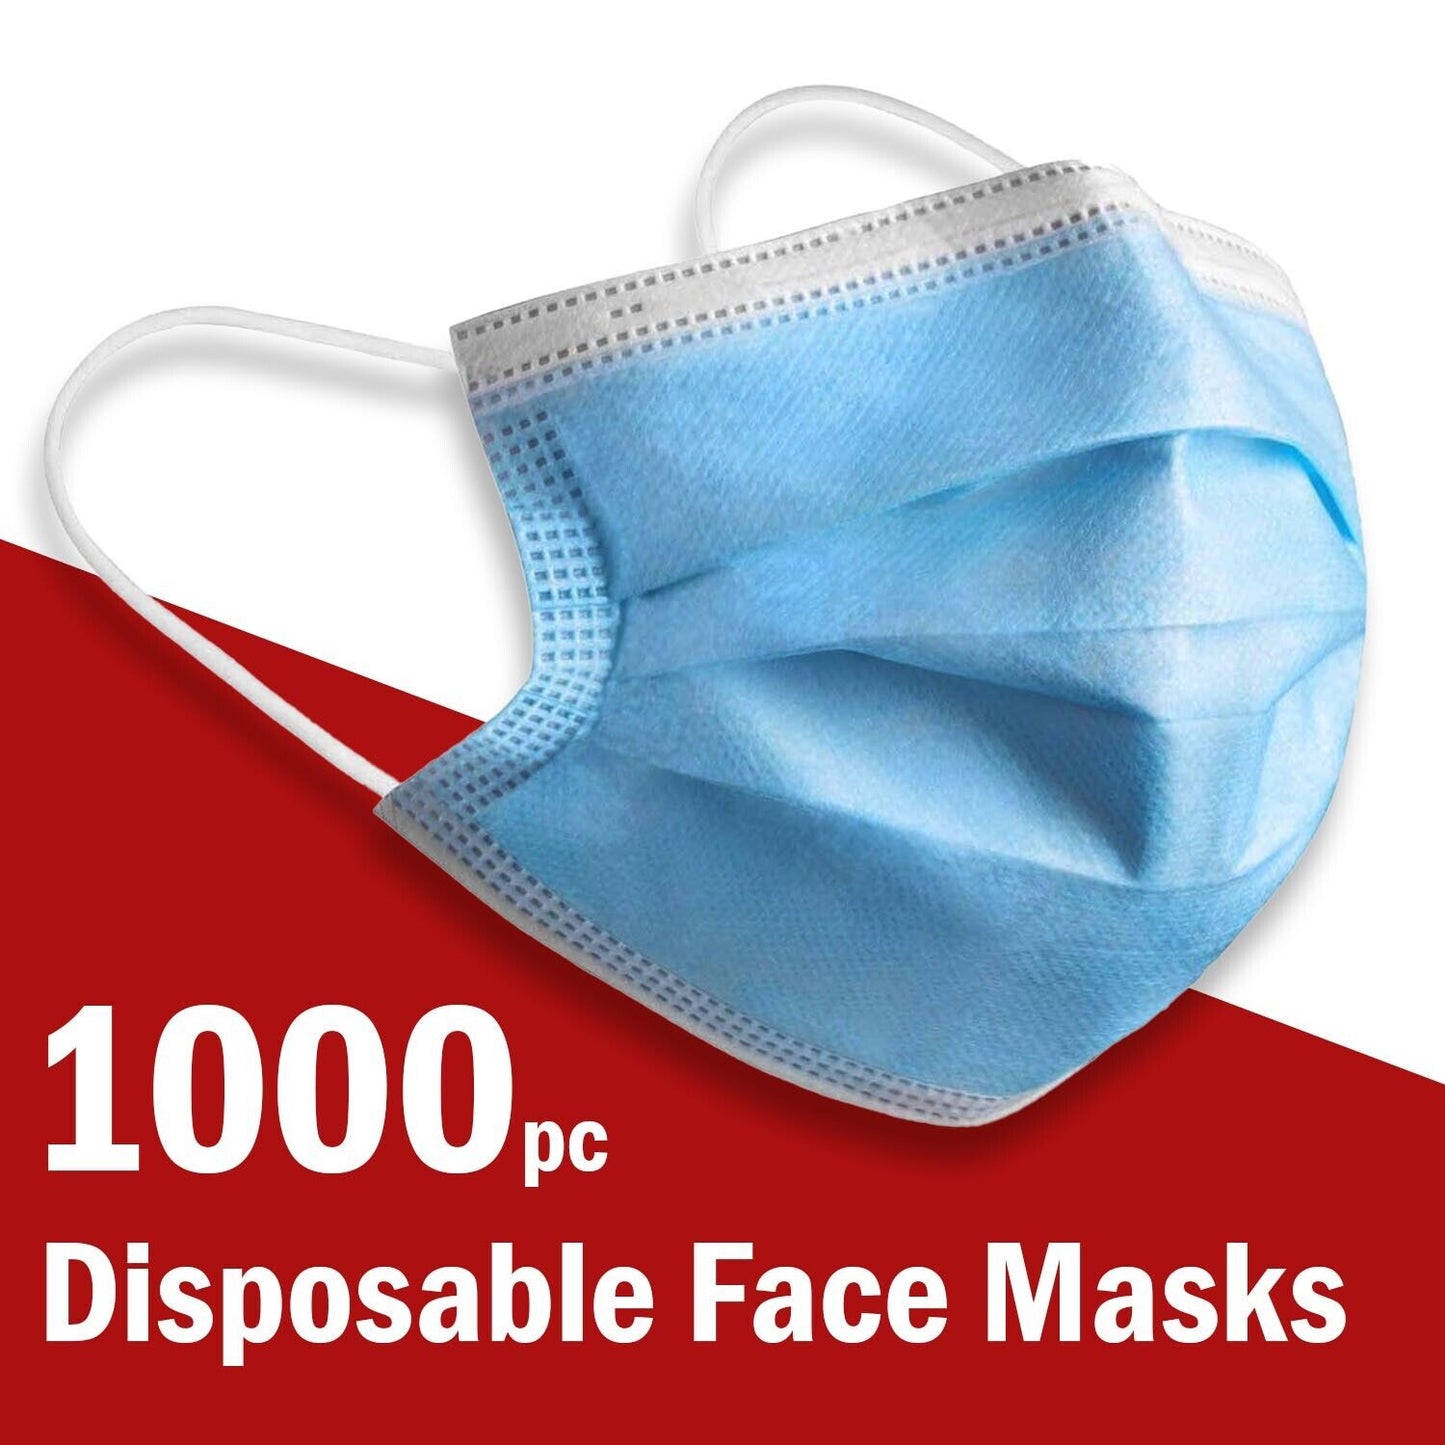 1000 Pcs Disposable Face Mask Non Medical Surgical 3-Ply Earloop Mouth Cover USA